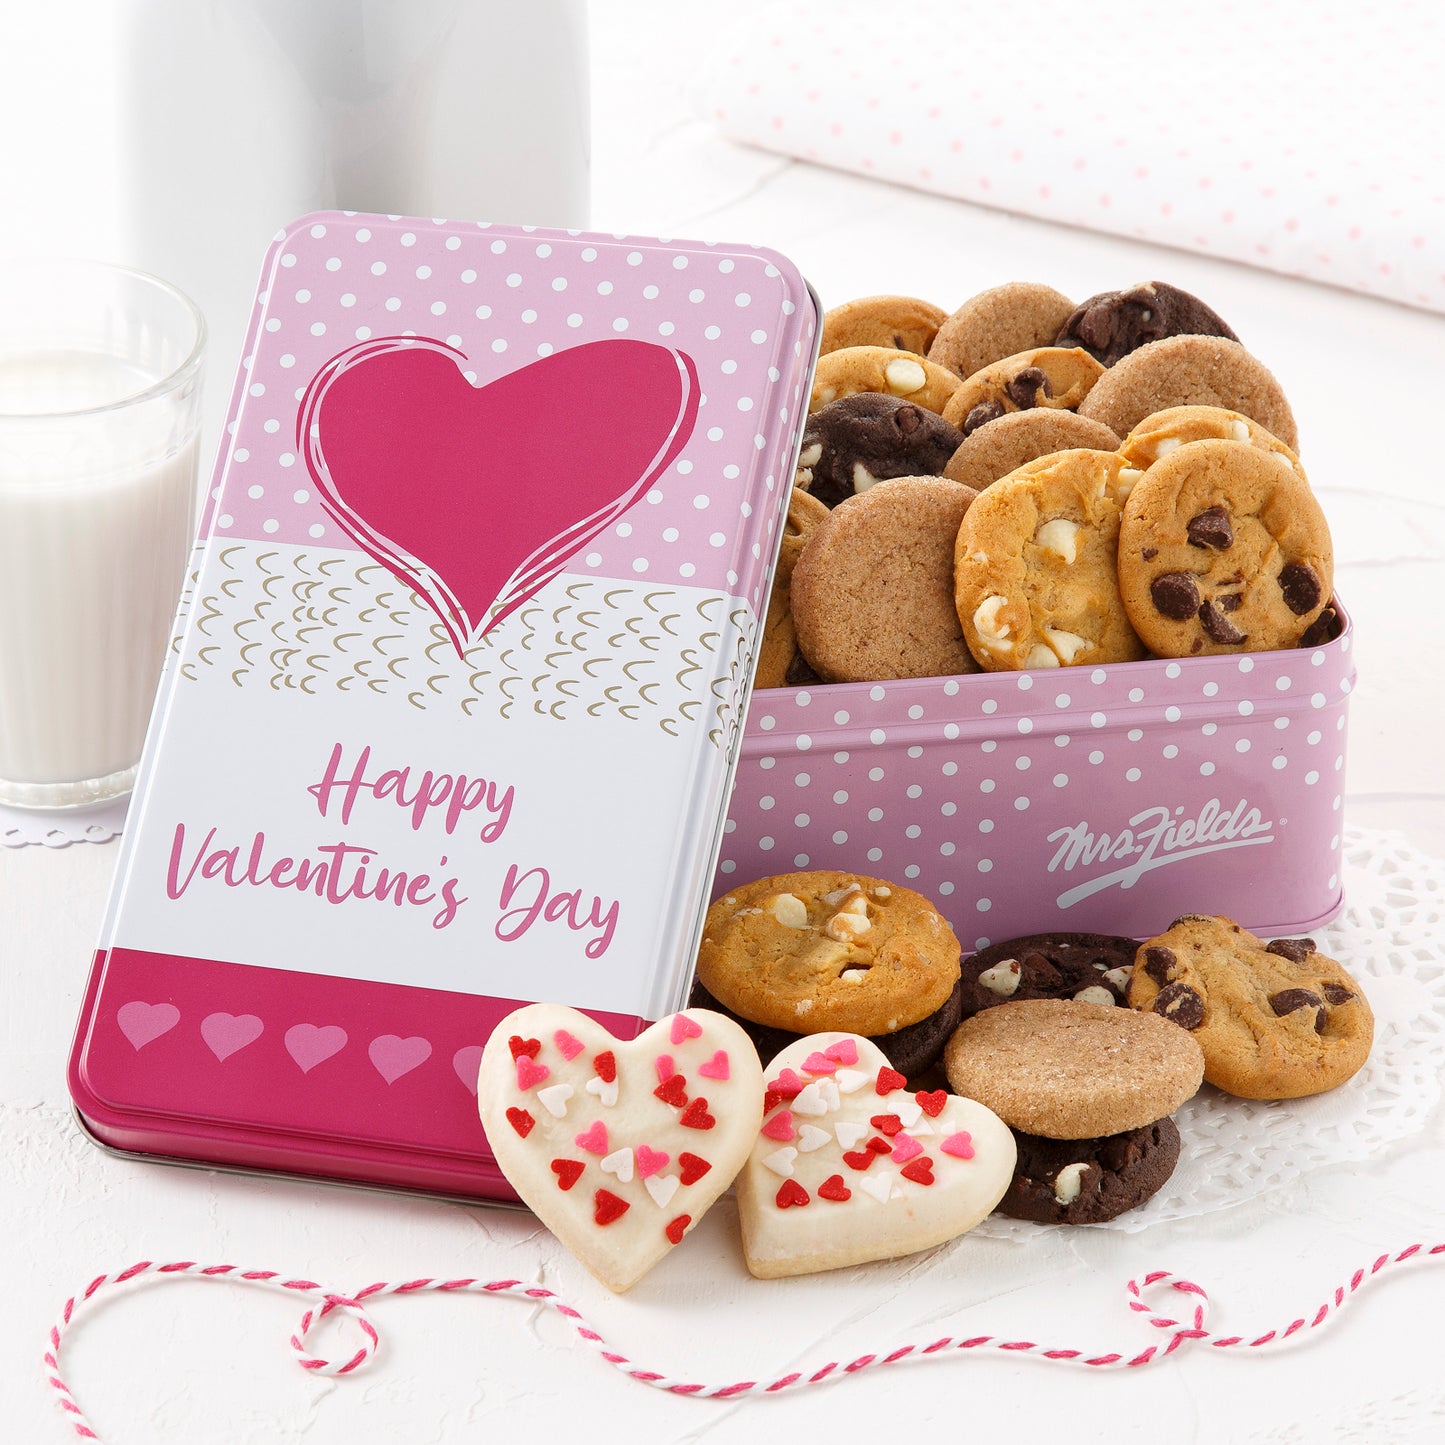 A pink Happy Valentine's Day gift tin filled with an assortment of Nibblers and two mini frosted heart cookies with sprinkles.